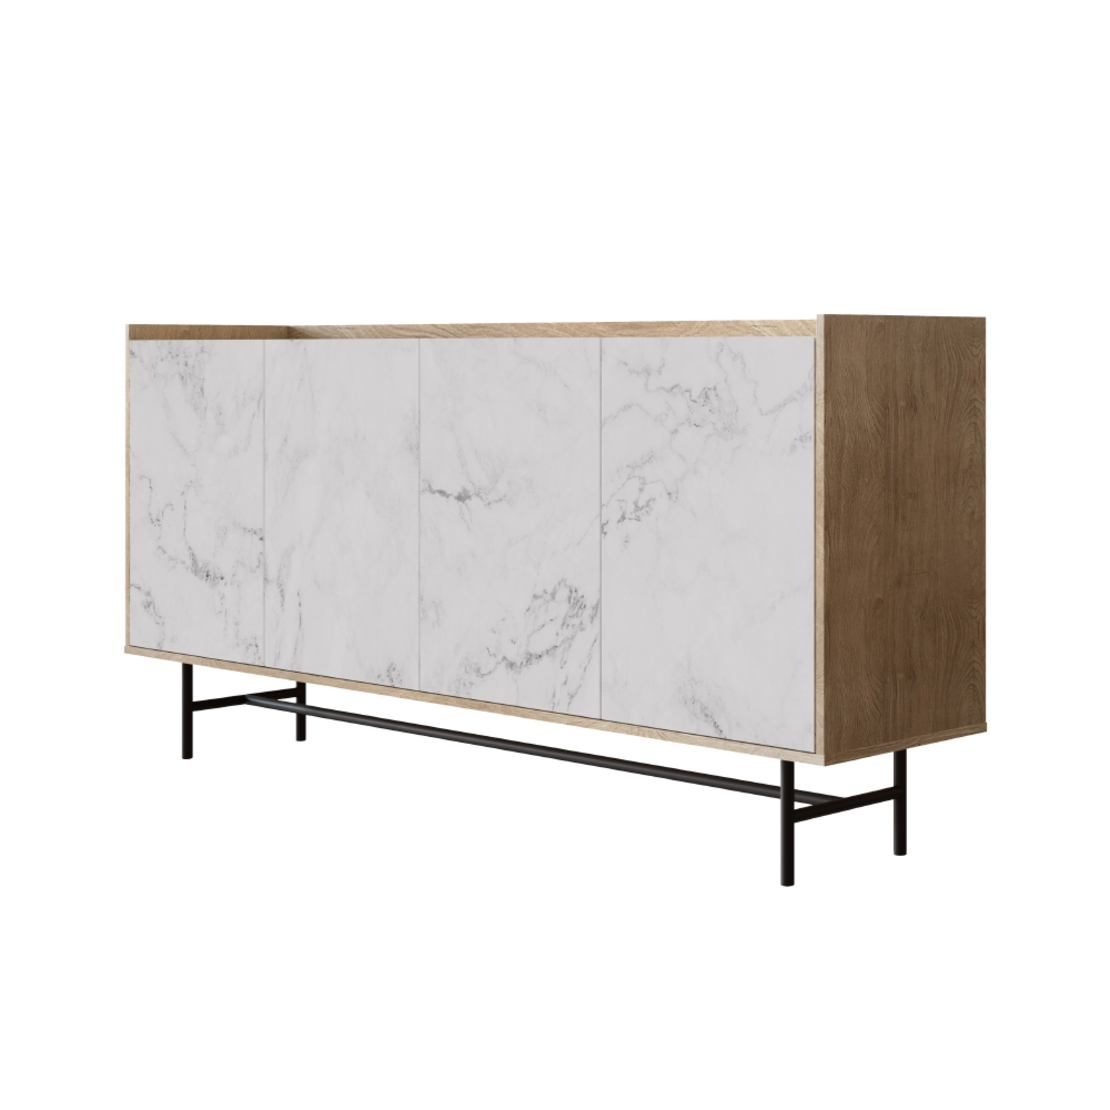 STOCKHOLM SIDEBOARD CHIPBOARD WITH MELAMINE CARTA SONOMA DECAPE WHITE WITH MARBLE PATTERN METAL BLACK 161x39,5xH80cm E1 PRC